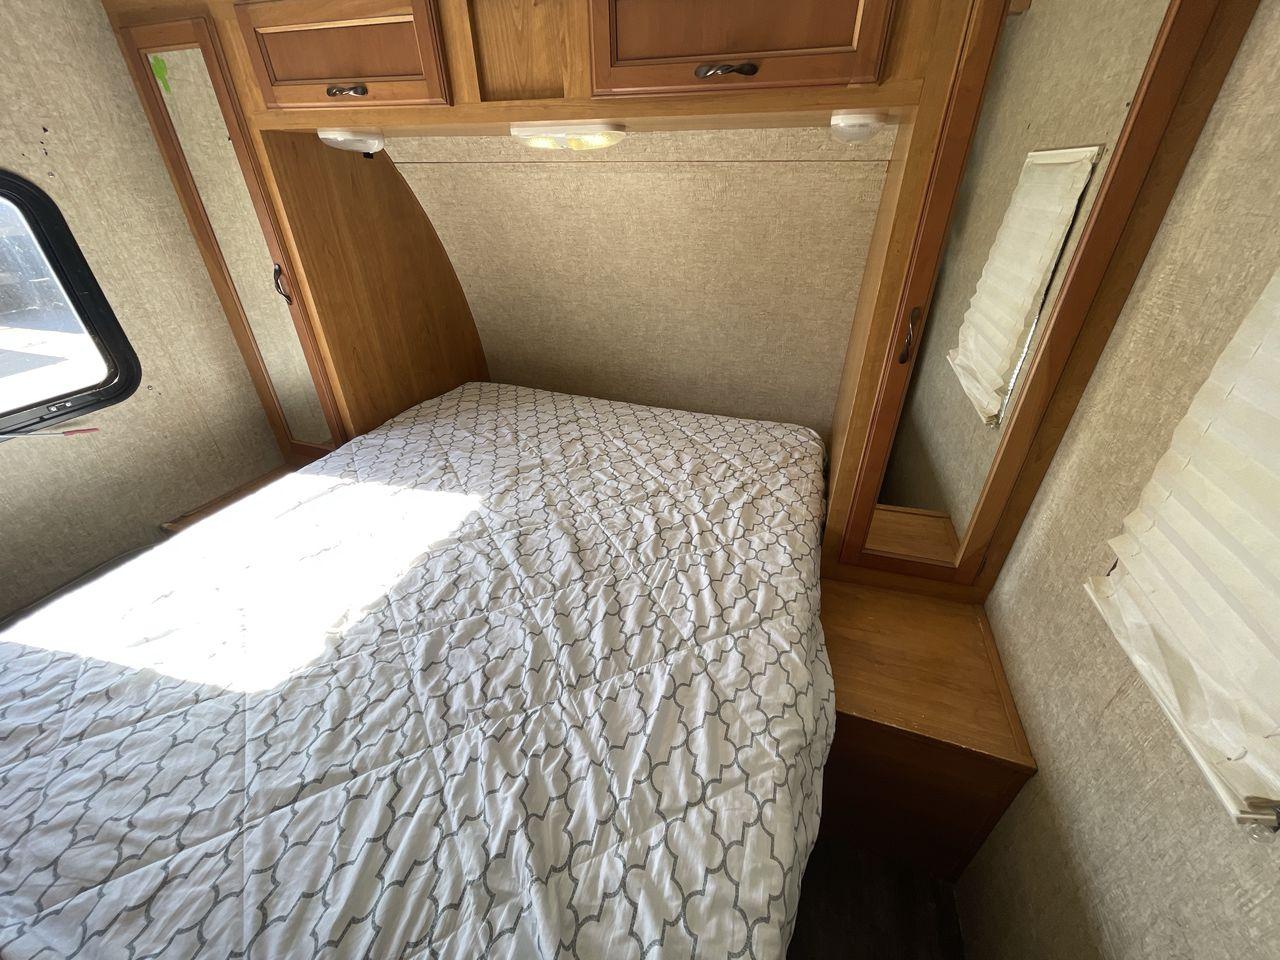 2014 BEIGE KZRV SPREE 282BHS (4EZTL2826E8) , Length: 31.33 ft. | Dry Weight: 5,610 lbs. | Gross Weight: 6,800 lbs. | Slides: 1 transmission, located at 4319 N Main St, Cleburne, TX, 76033, (817) 678-5133, 32.385960, -97.391212 - Take the 2014 KZ RV Spree 282BHS Travel Trailer on your next vacation. Comfort, style, and functionality are all combined in this well-designed travel trailer, which makes it a great option for families or groups looking for a dependable and roomy mobile home. This trailer measures 31.33 ft in le - Photo #17